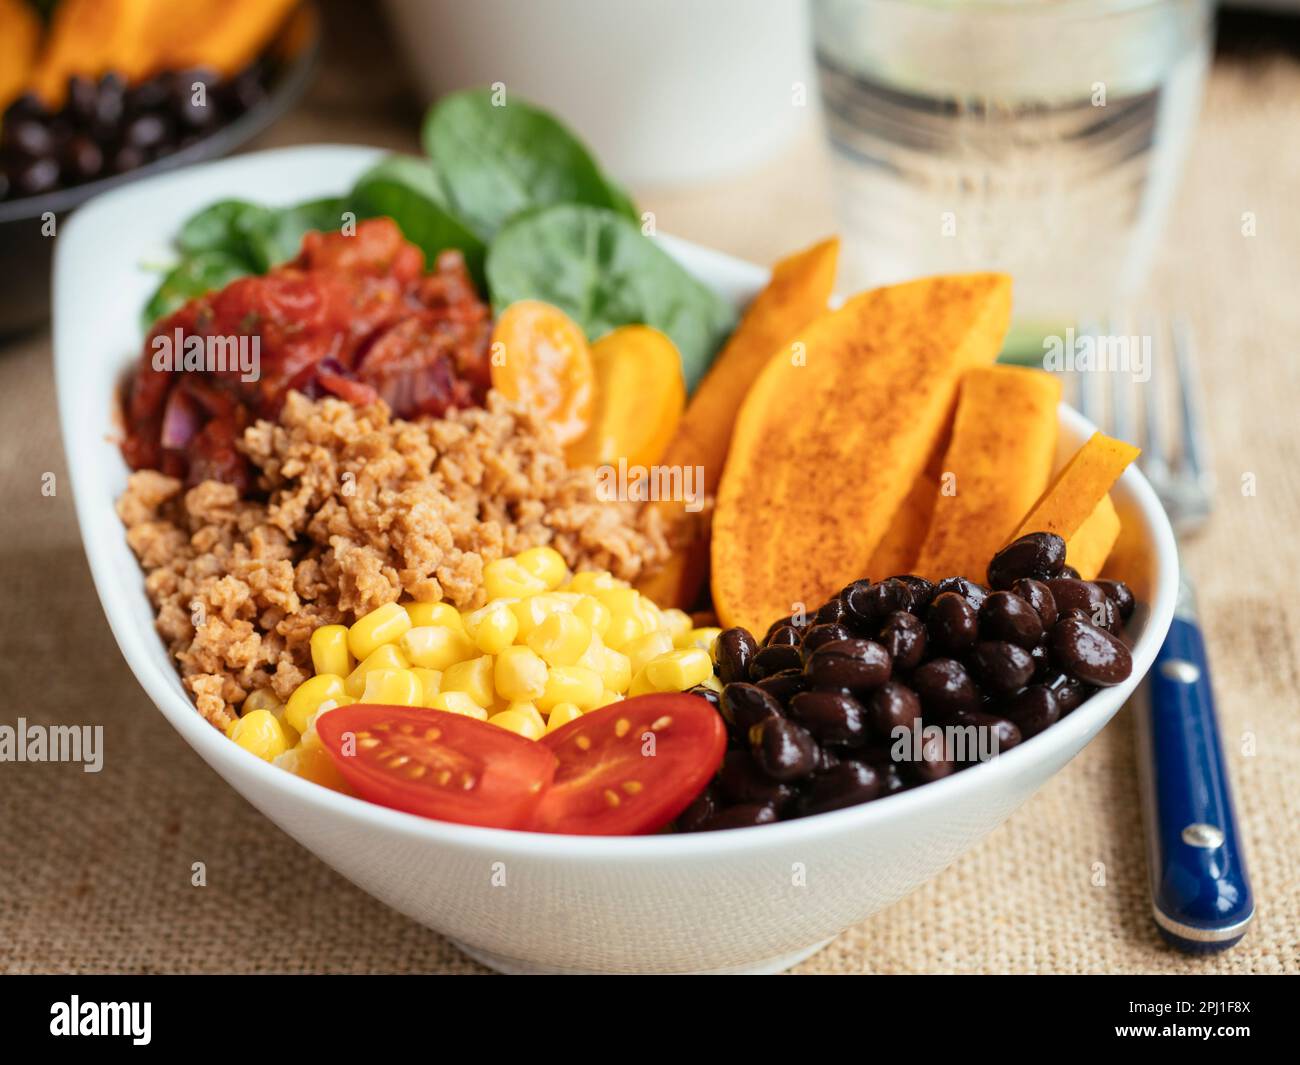 Sweet potato salad bowl with spinach, TVP, corn, black beans, tomato salsa and cherry tomatoes Stock Photo